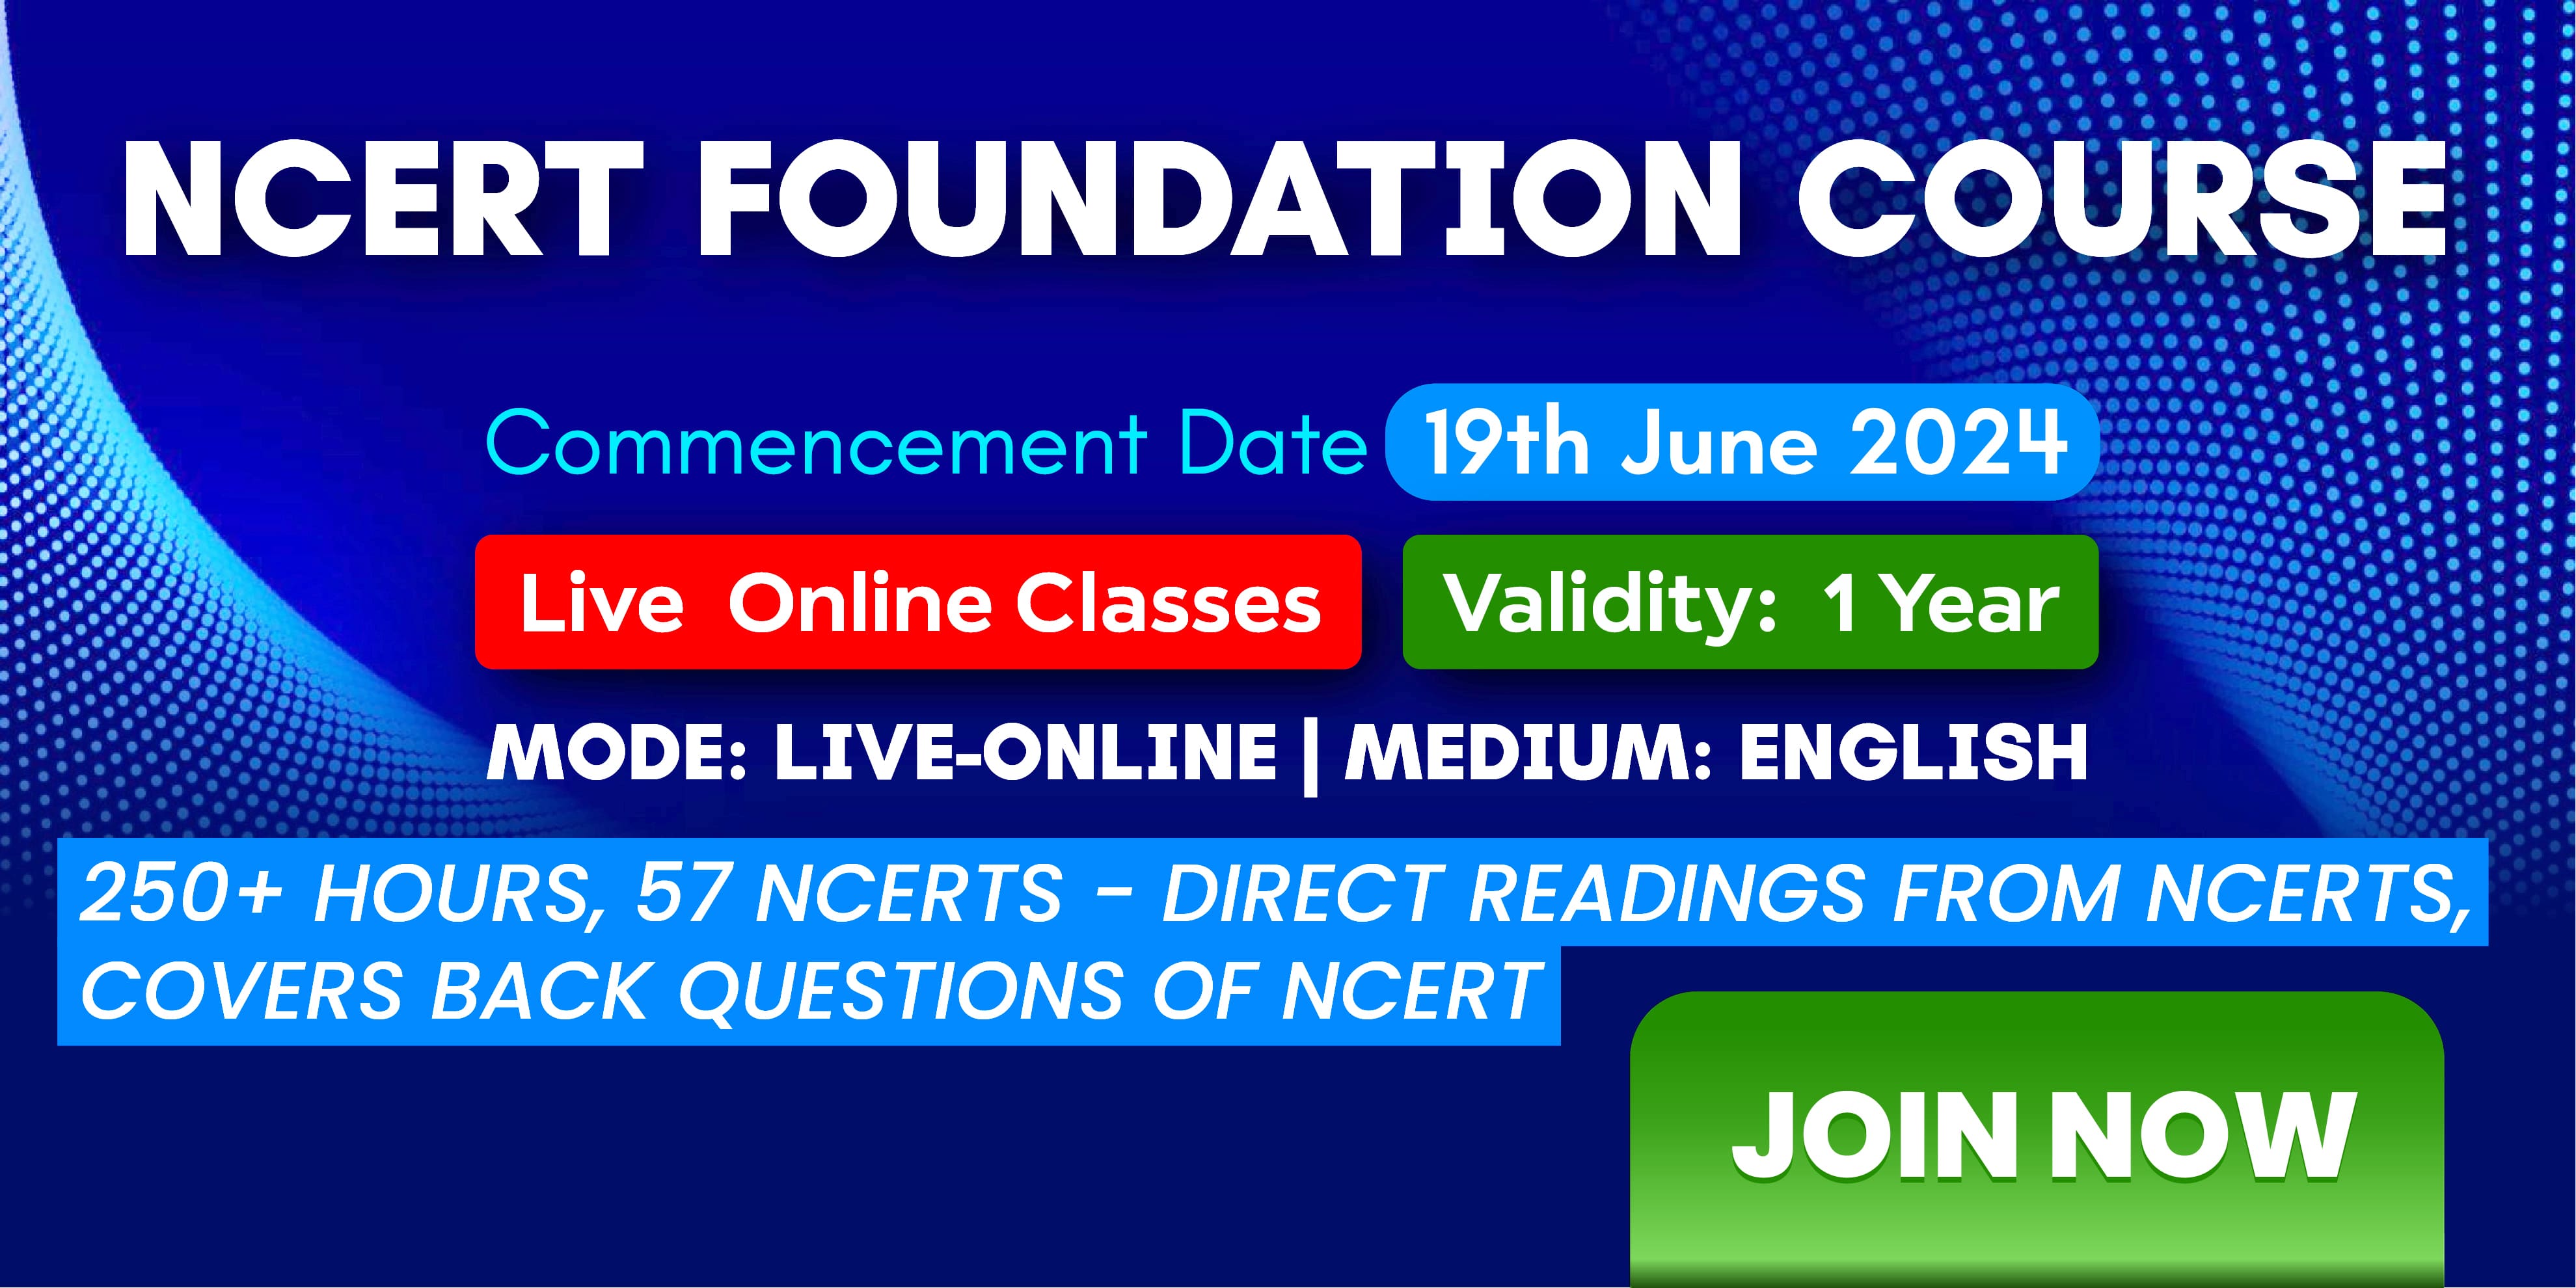 NCERT Foundation Course